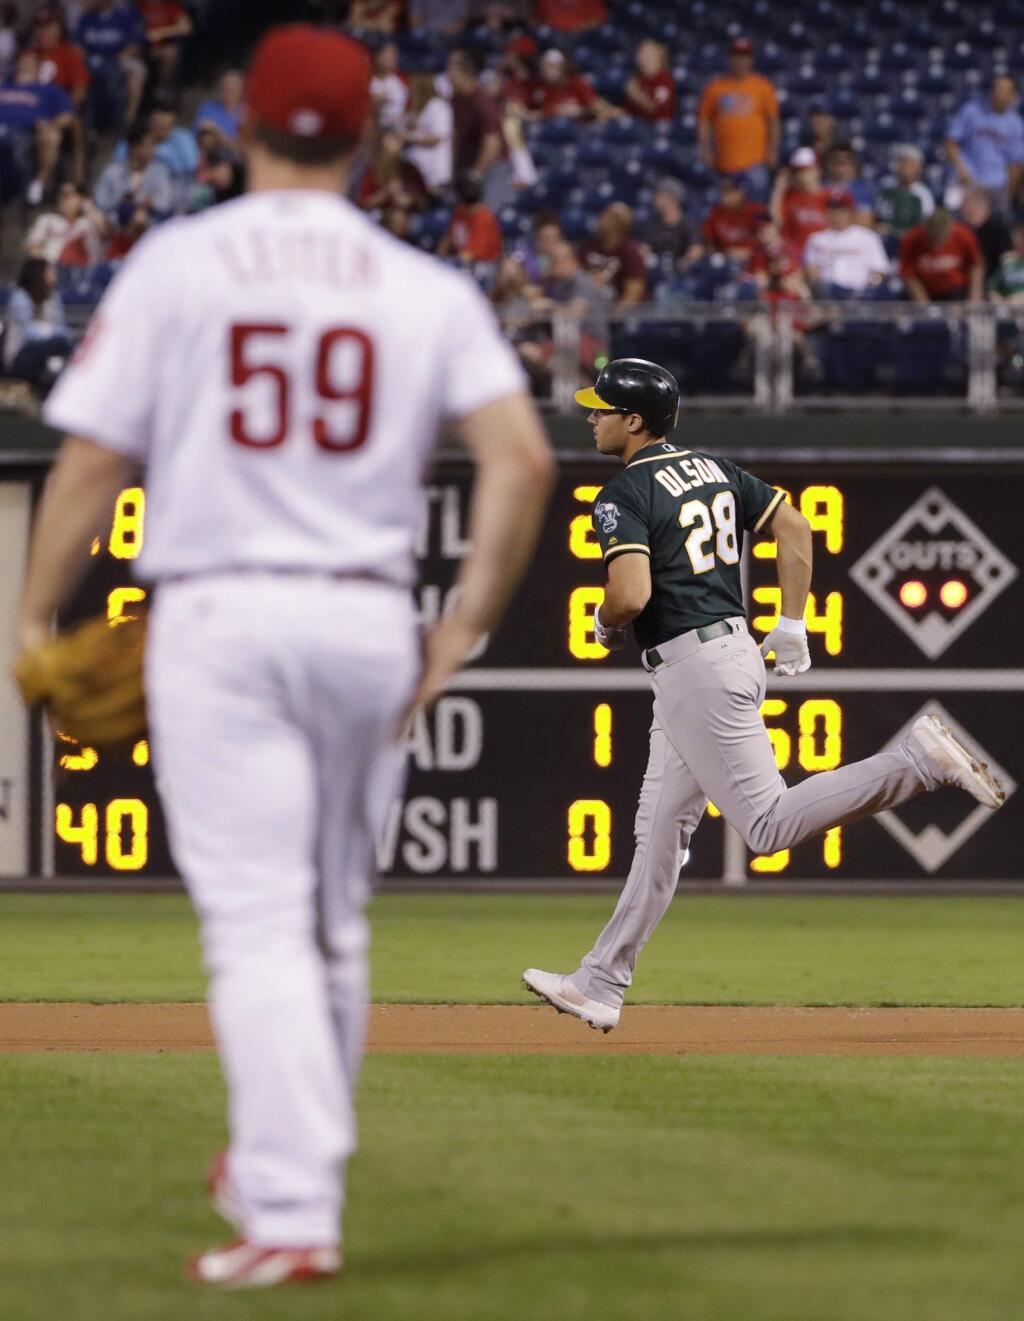 Oakland Athletics' Matt Olson, right, rounds the bases after hitting a two-run home run off Philadelphia Phillies starting pitcher Mark Leiter Jr. during the first inning of a baseball game, Friday, Sept. 15, 2017, in Philadelphia. (AP Photo/Matt Slocum)